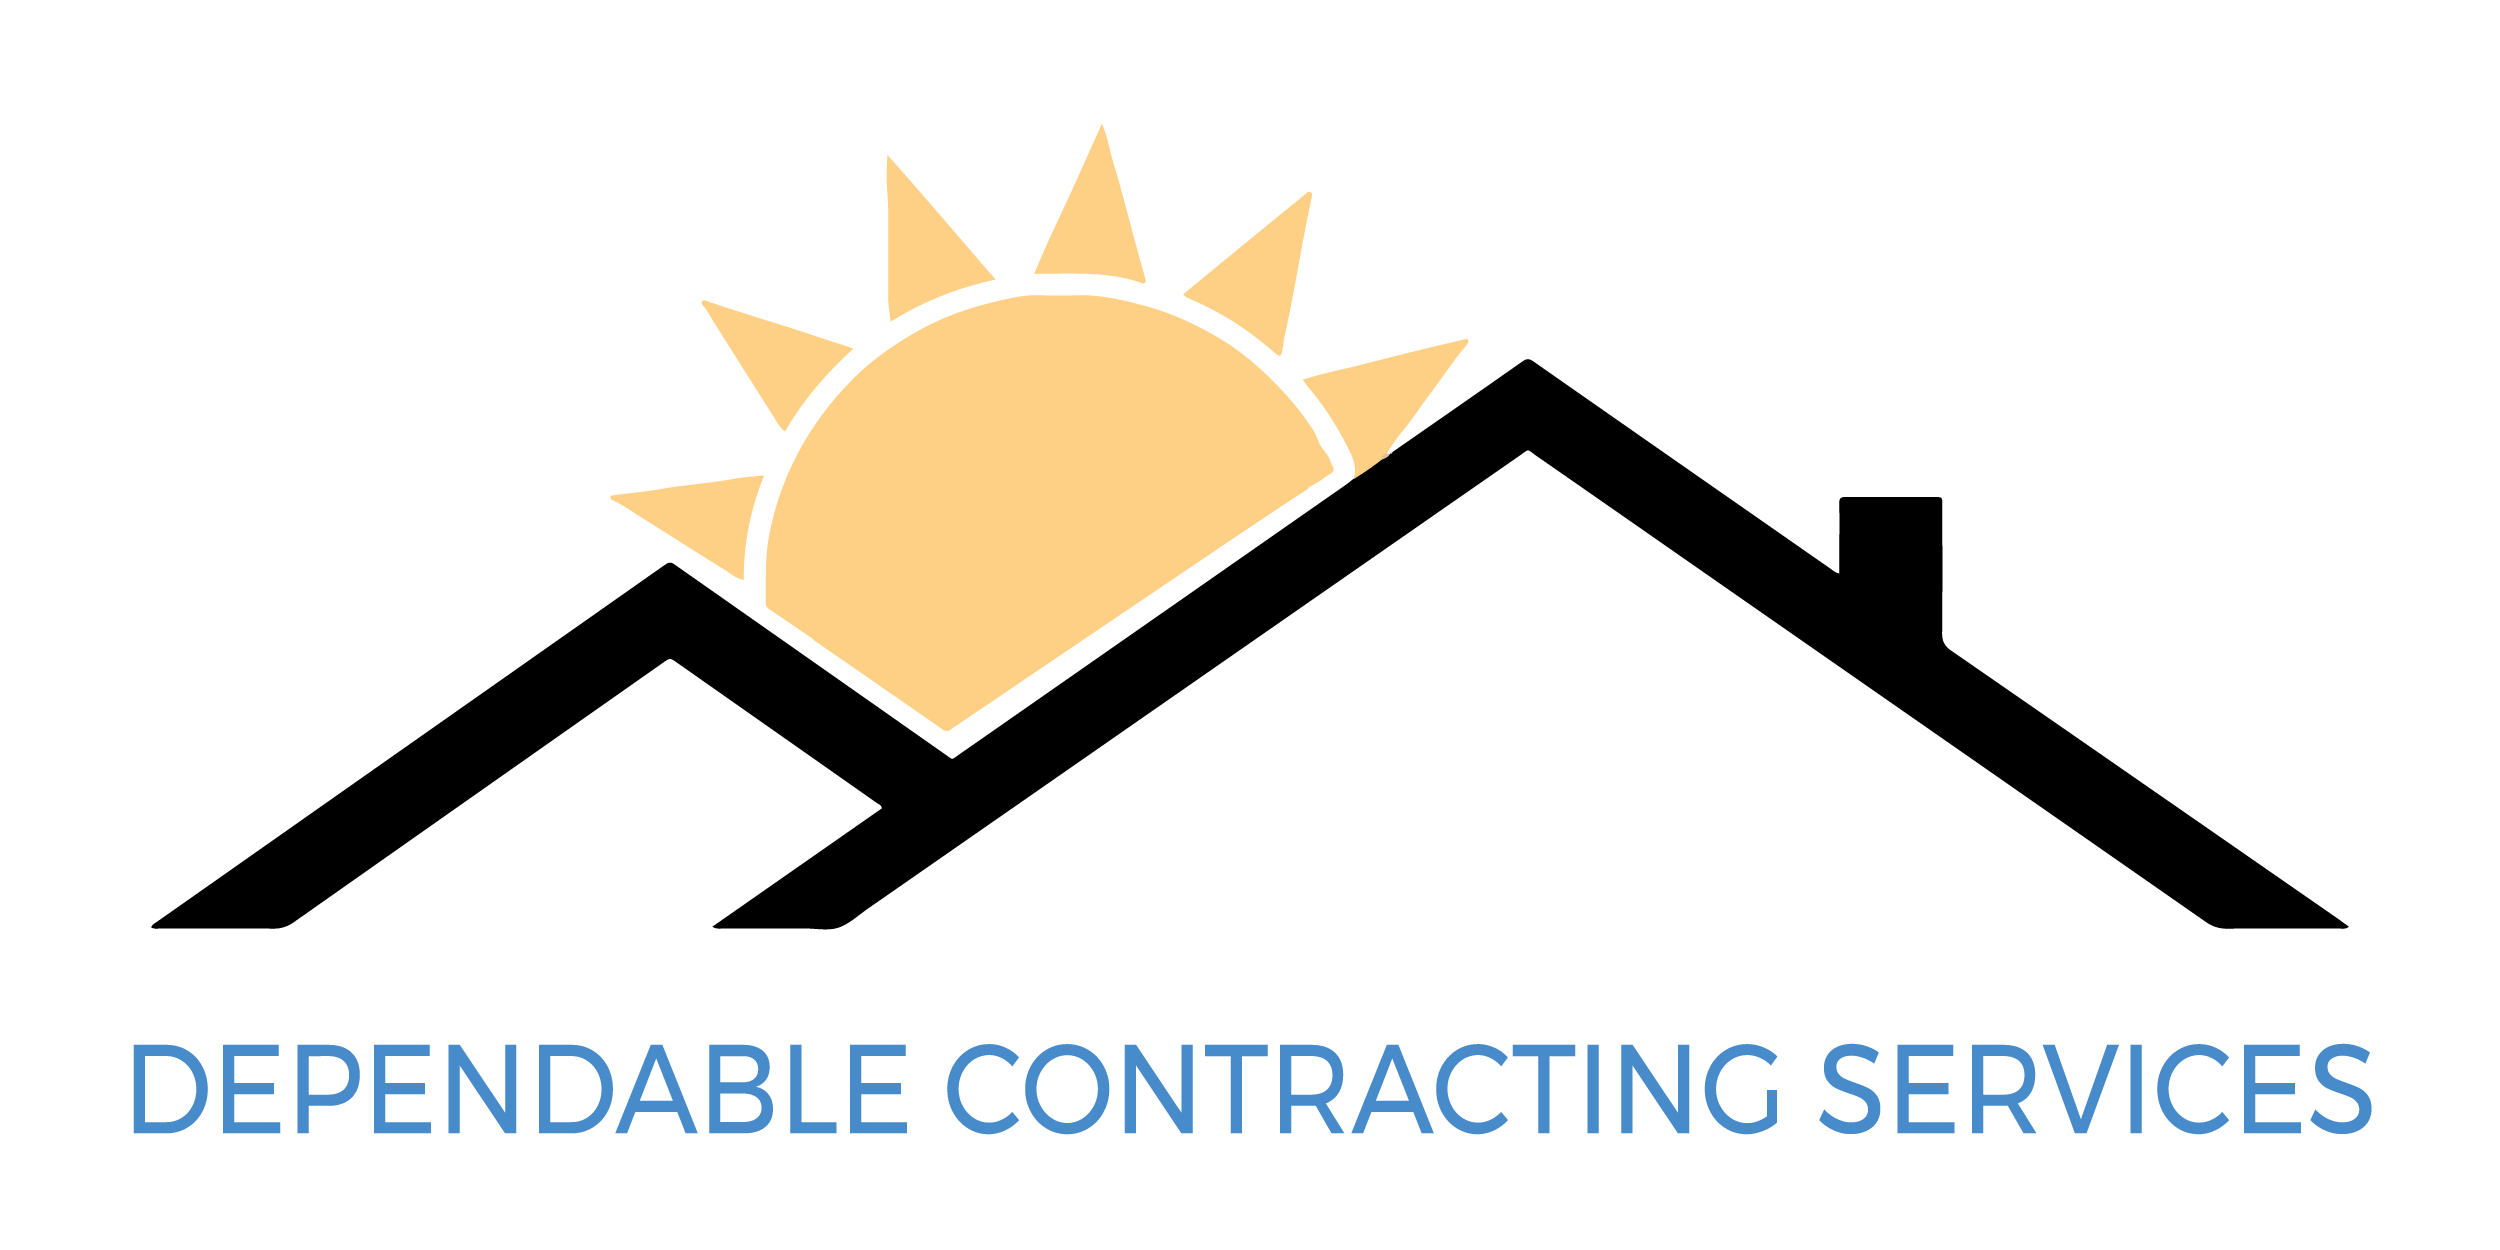 Dependable Contracting Services logo